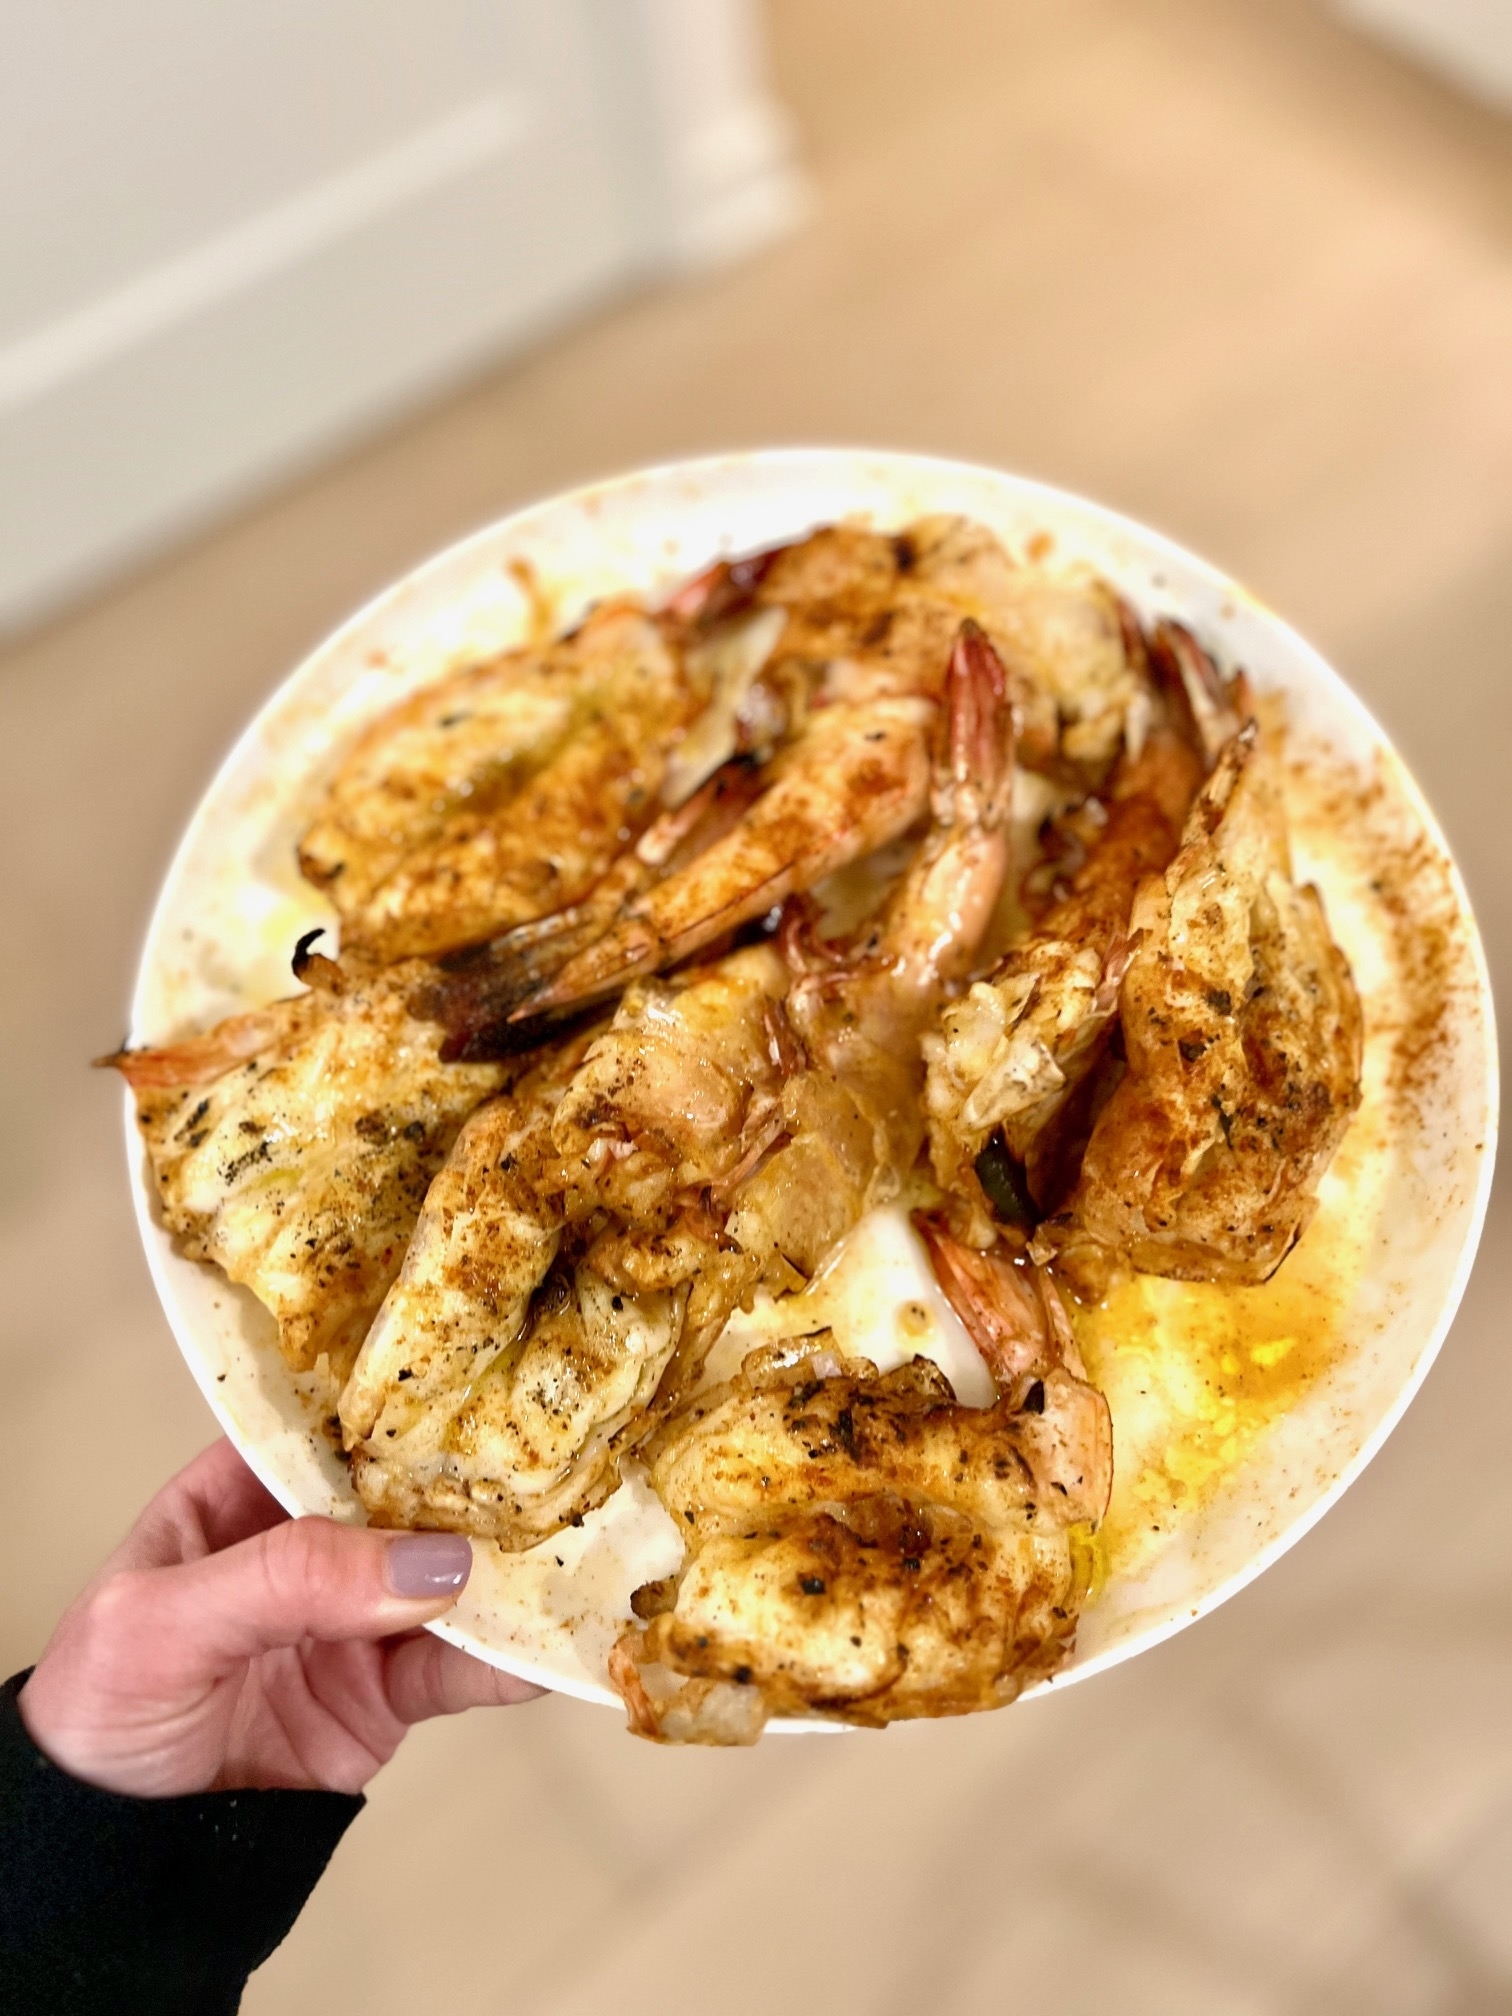 Person holding a plate of grilled prawns